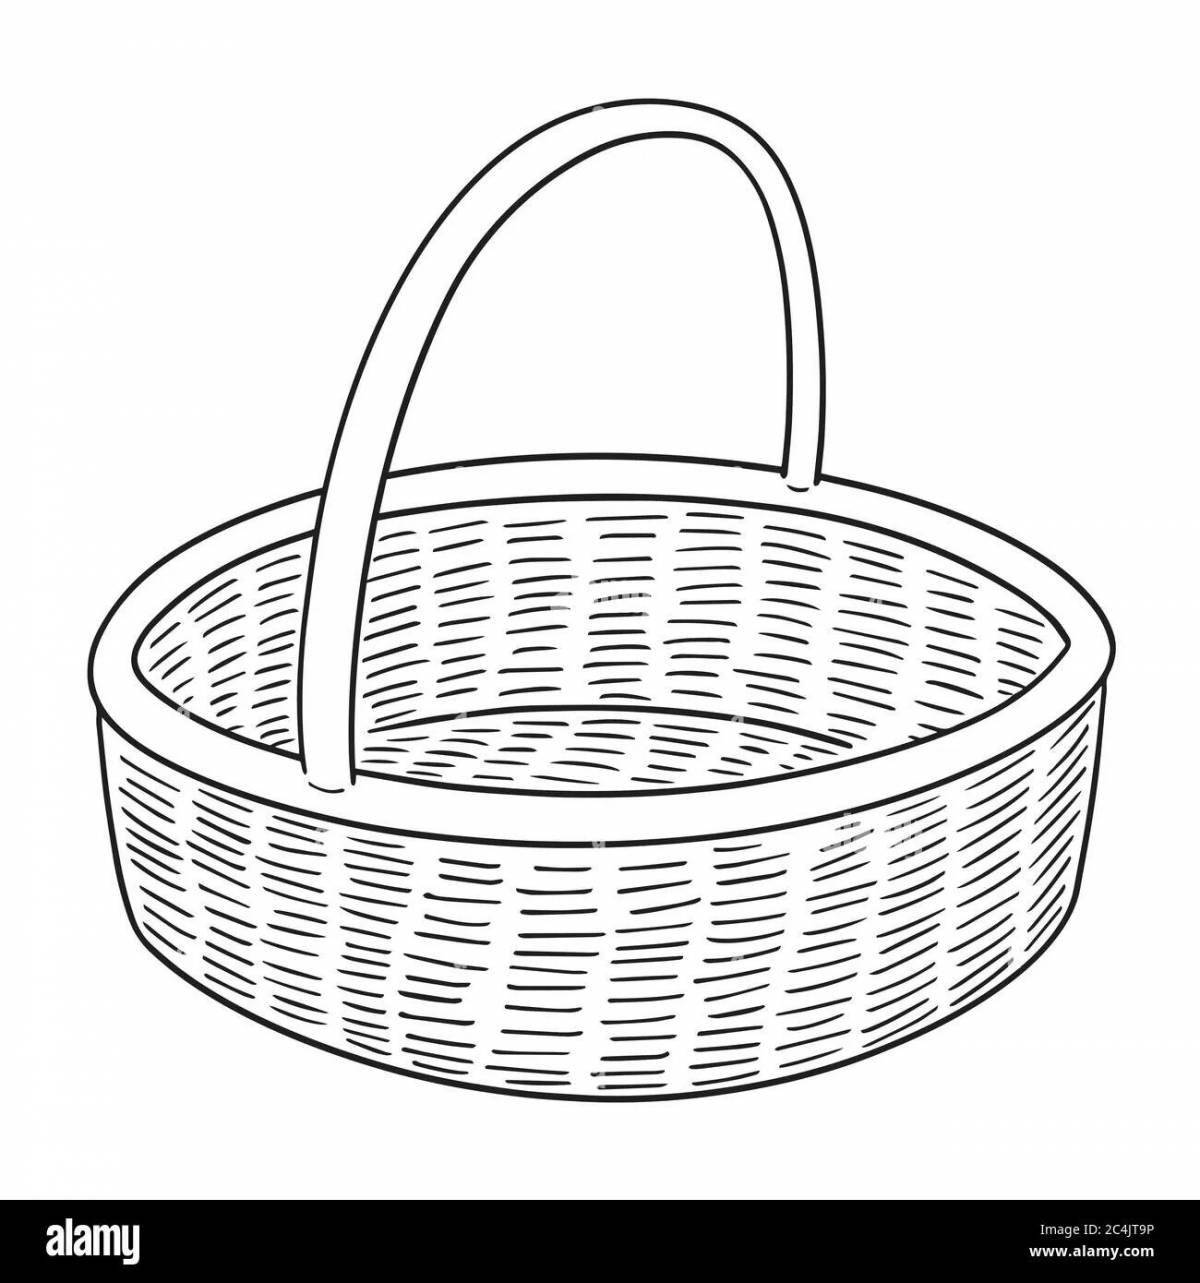 Fabulous empty basket coloring book for kids